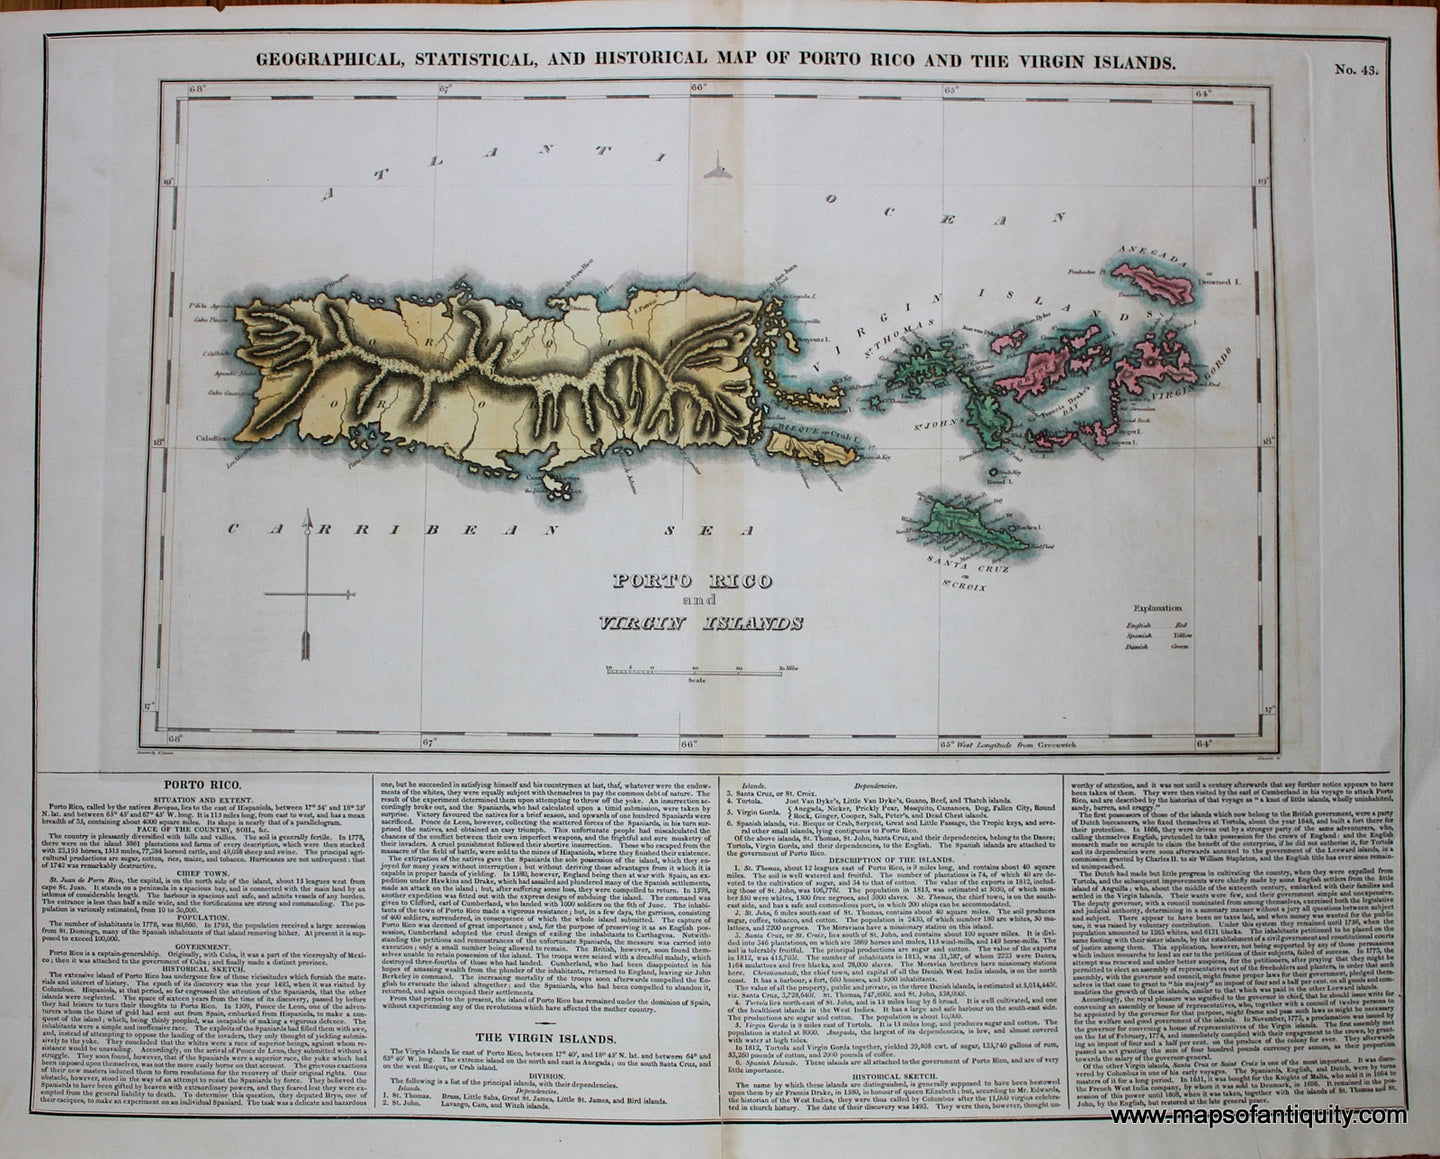 Antique-Hand-Colored-Map-Geographical-Statistical-and-Historical-Map-of-Porto-Rico-and-the-Virgin-Islands.**********-Central-America-and-Caribbean-West-Indies-1825-Carey-&-Lea-Maps-Of-Antiquity